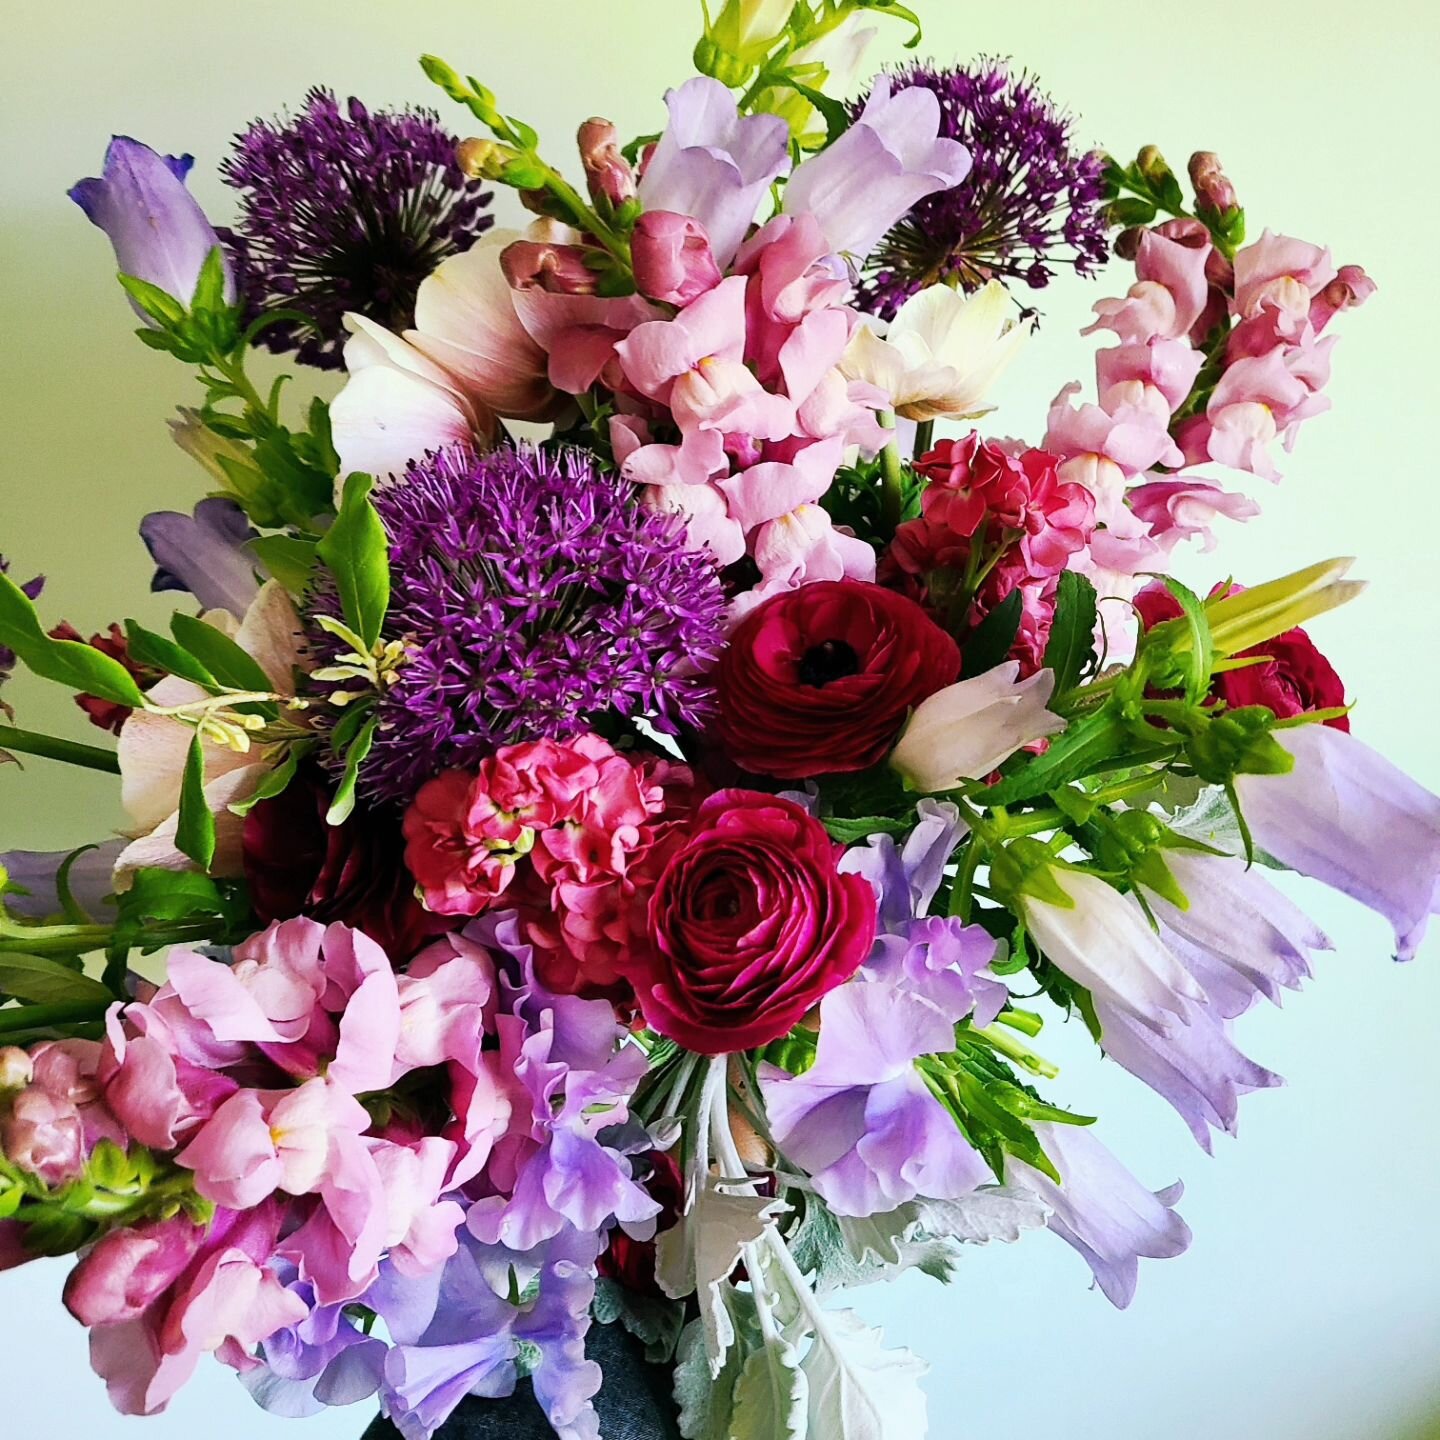 Mother's Day Flowers are available for pre-order! 

Bouquets and arrangements come in vases for easy gift giving and are available for pick up or delivery on Friday, Saturday, or Sunday!  All the beautiful details can be found in our SHOP page. 

Tha